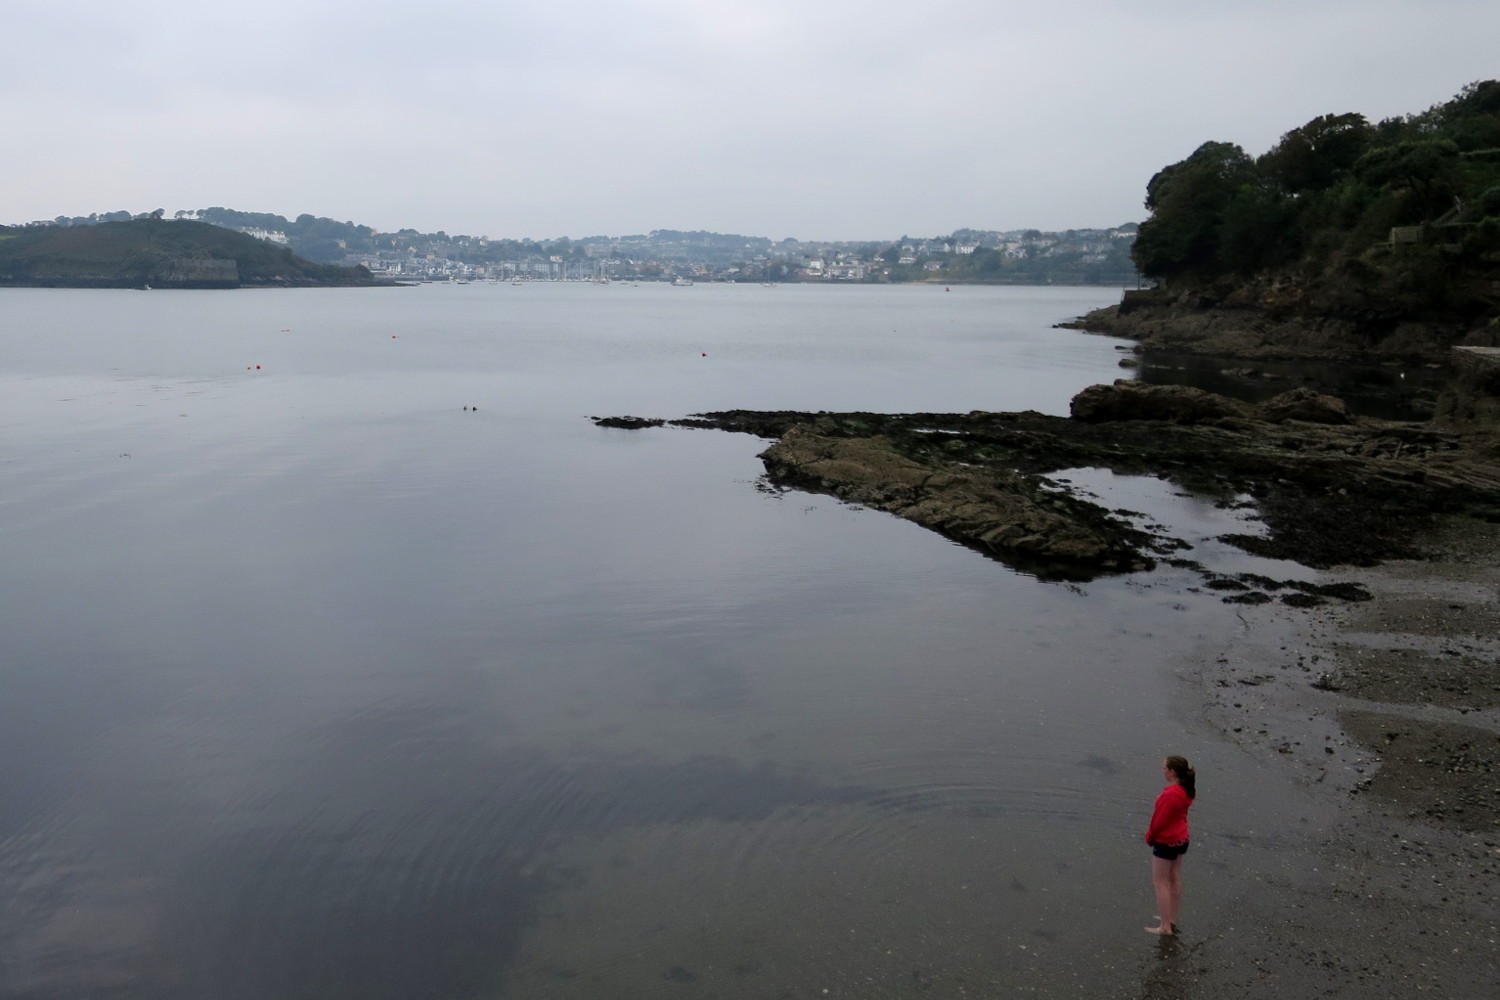 Looking back from the Bulman pub to Kinsale. Image by James Smart / Lonely Planet